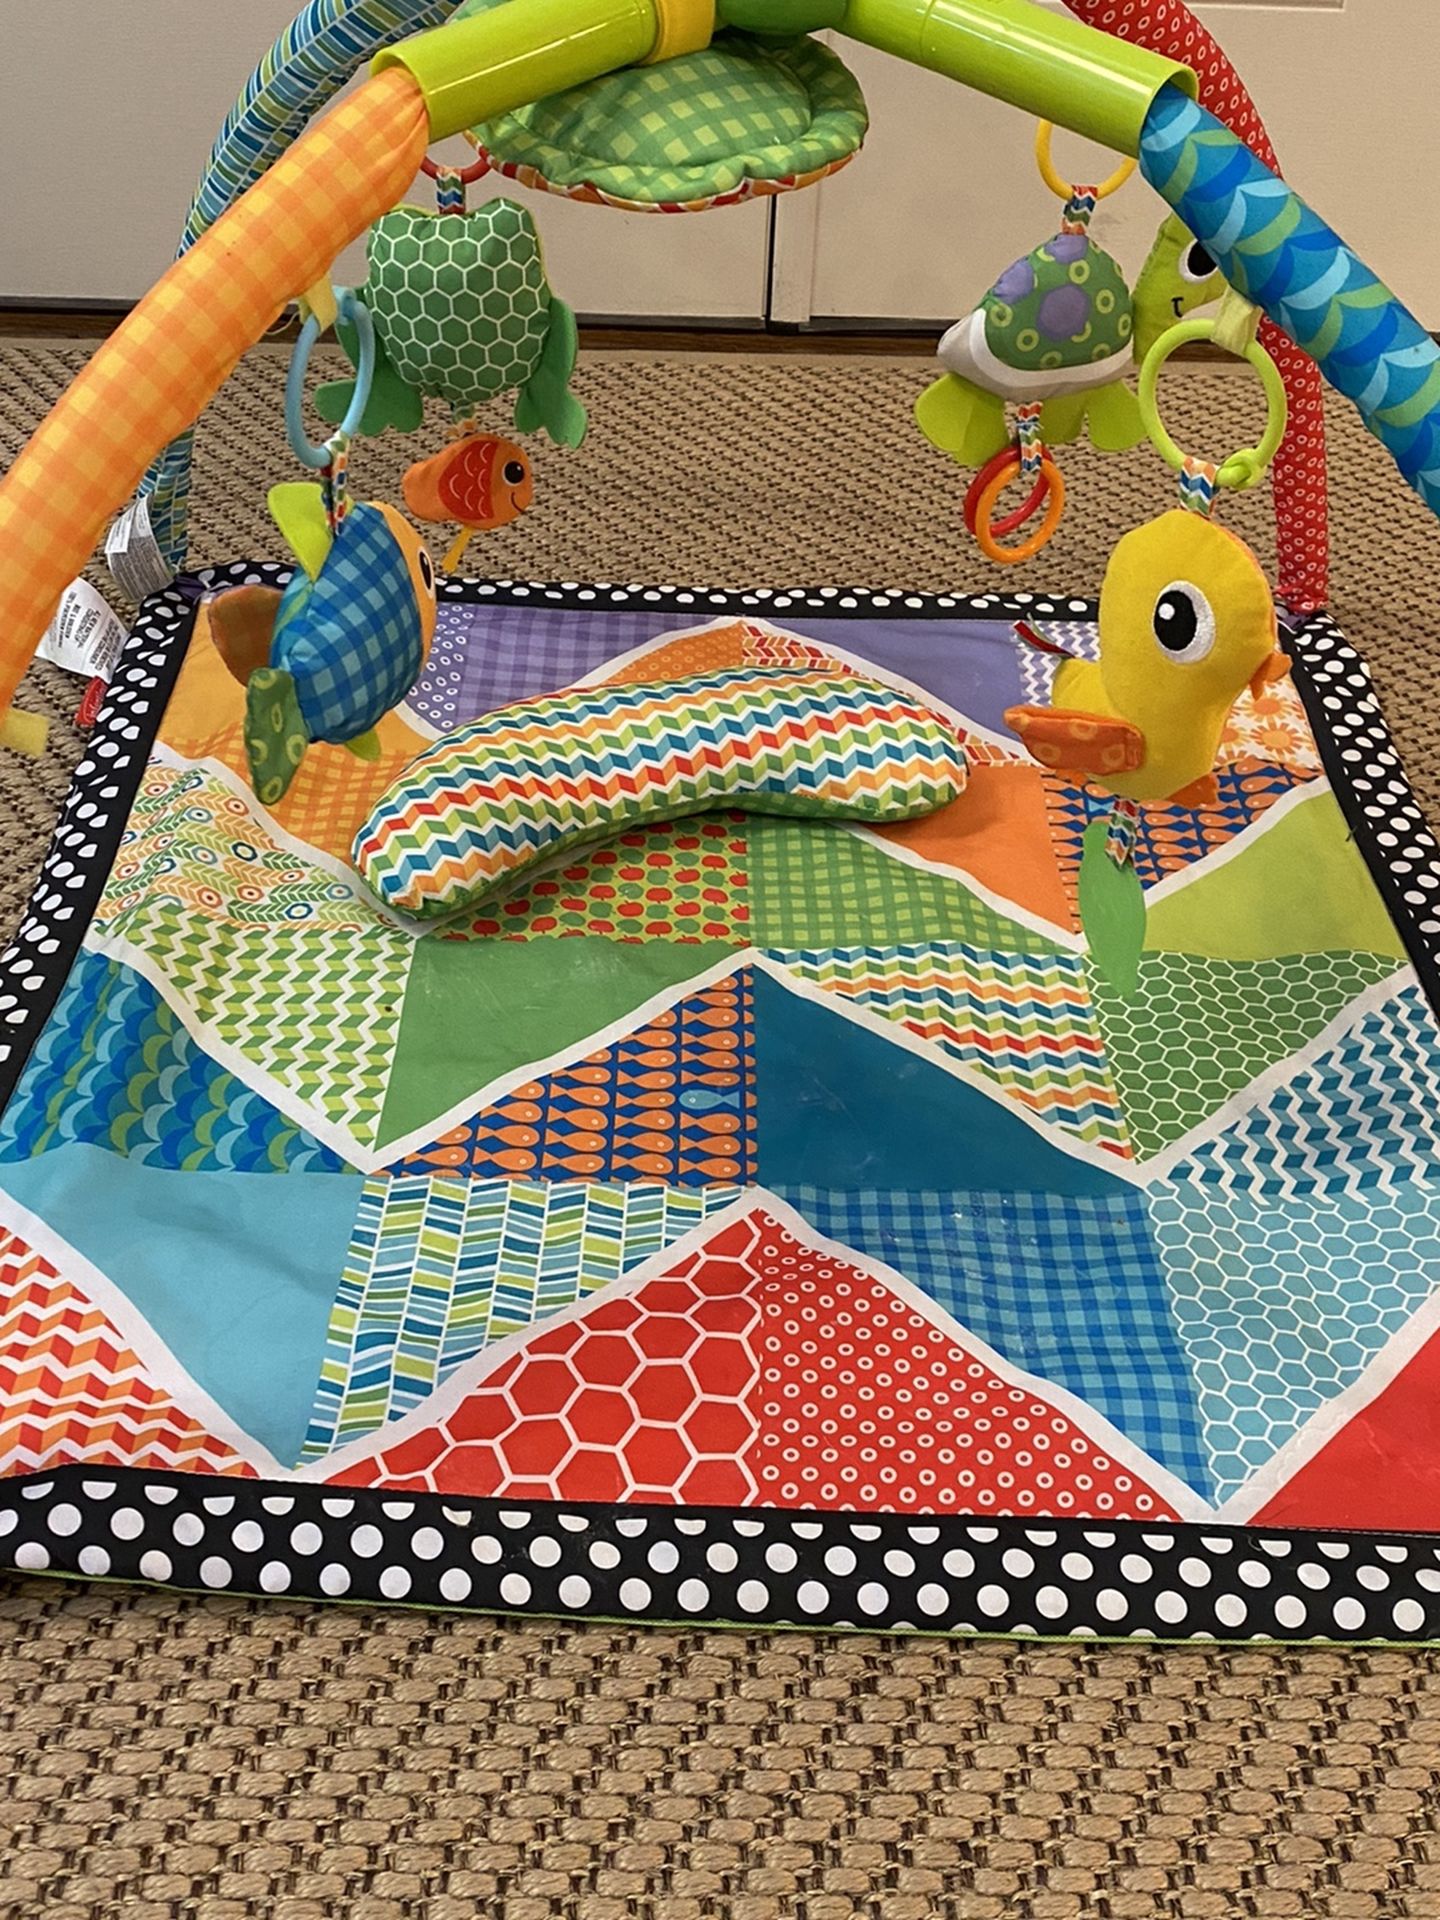 Infantino activity gym and play mat for sale